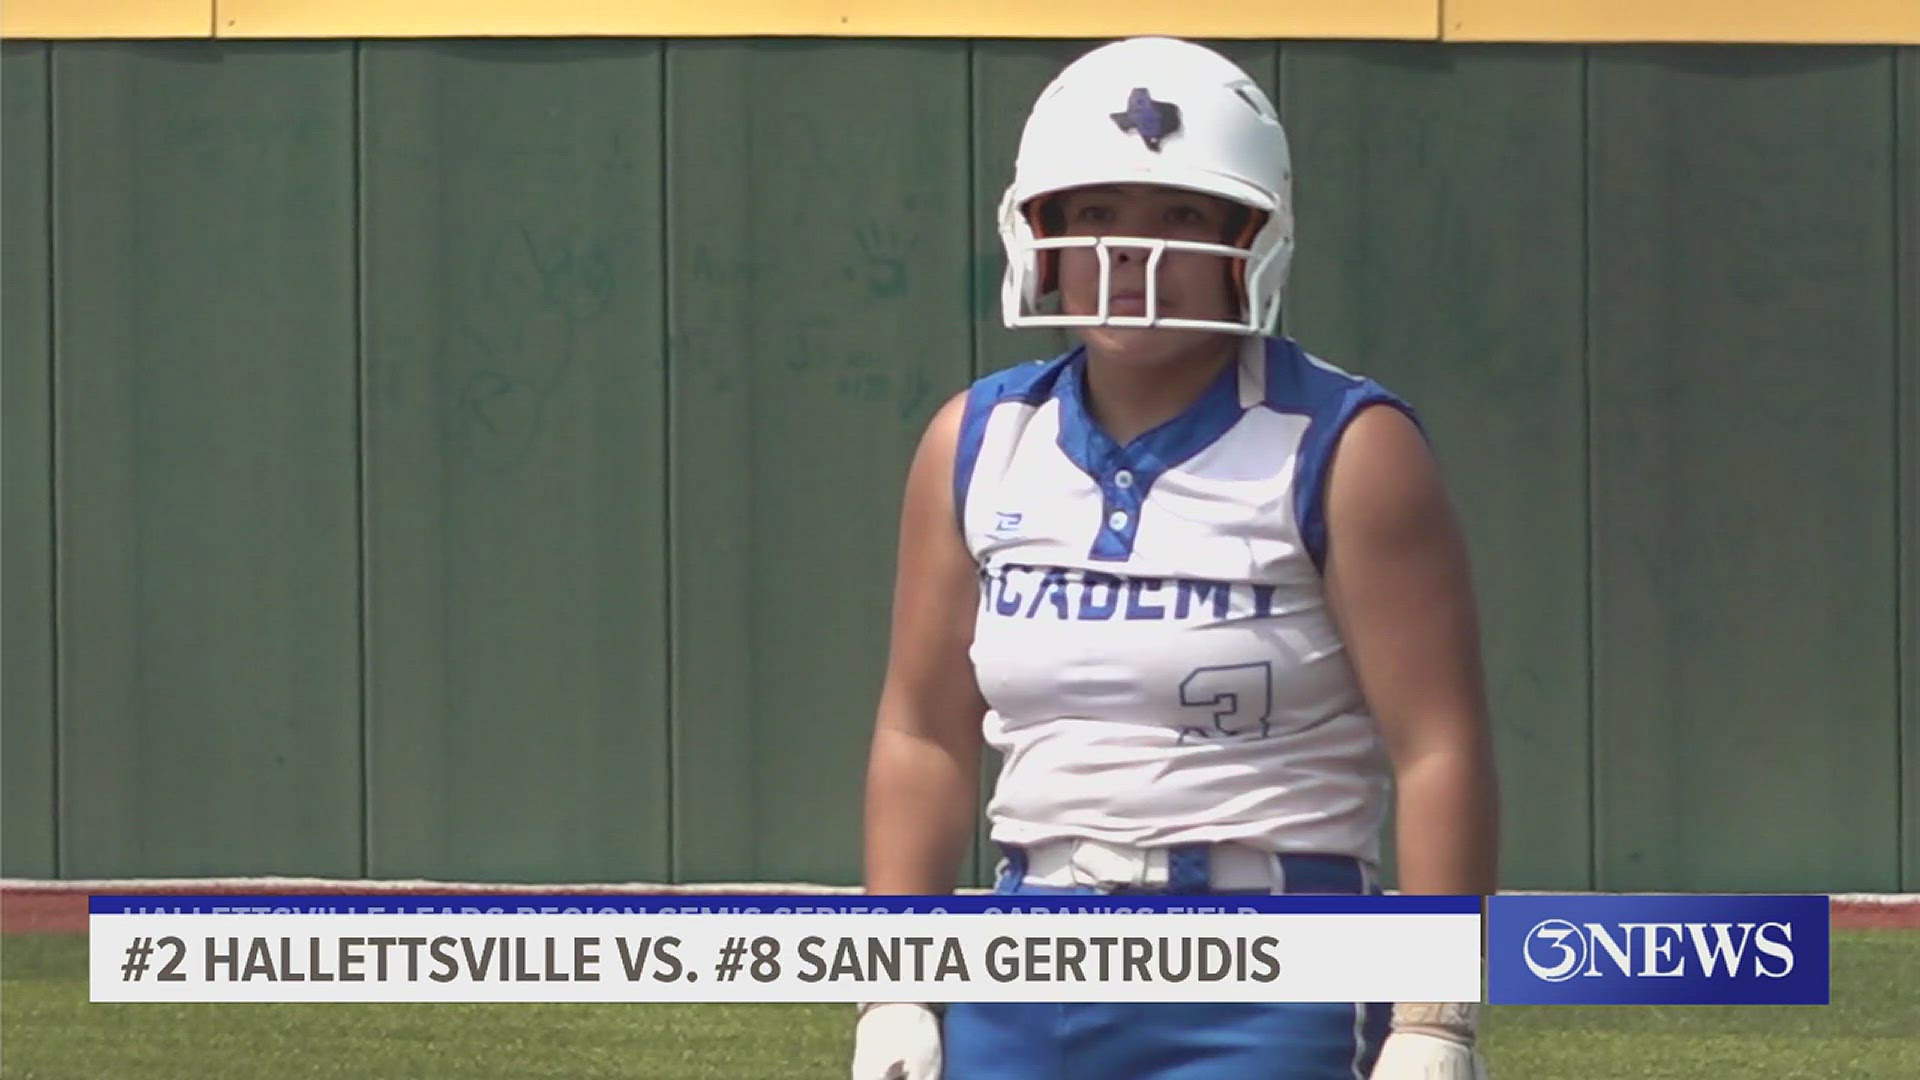 Santa Gertrudis Academy's season ended on Saturday as they lost, 6-4, in game two against Hallettsville.